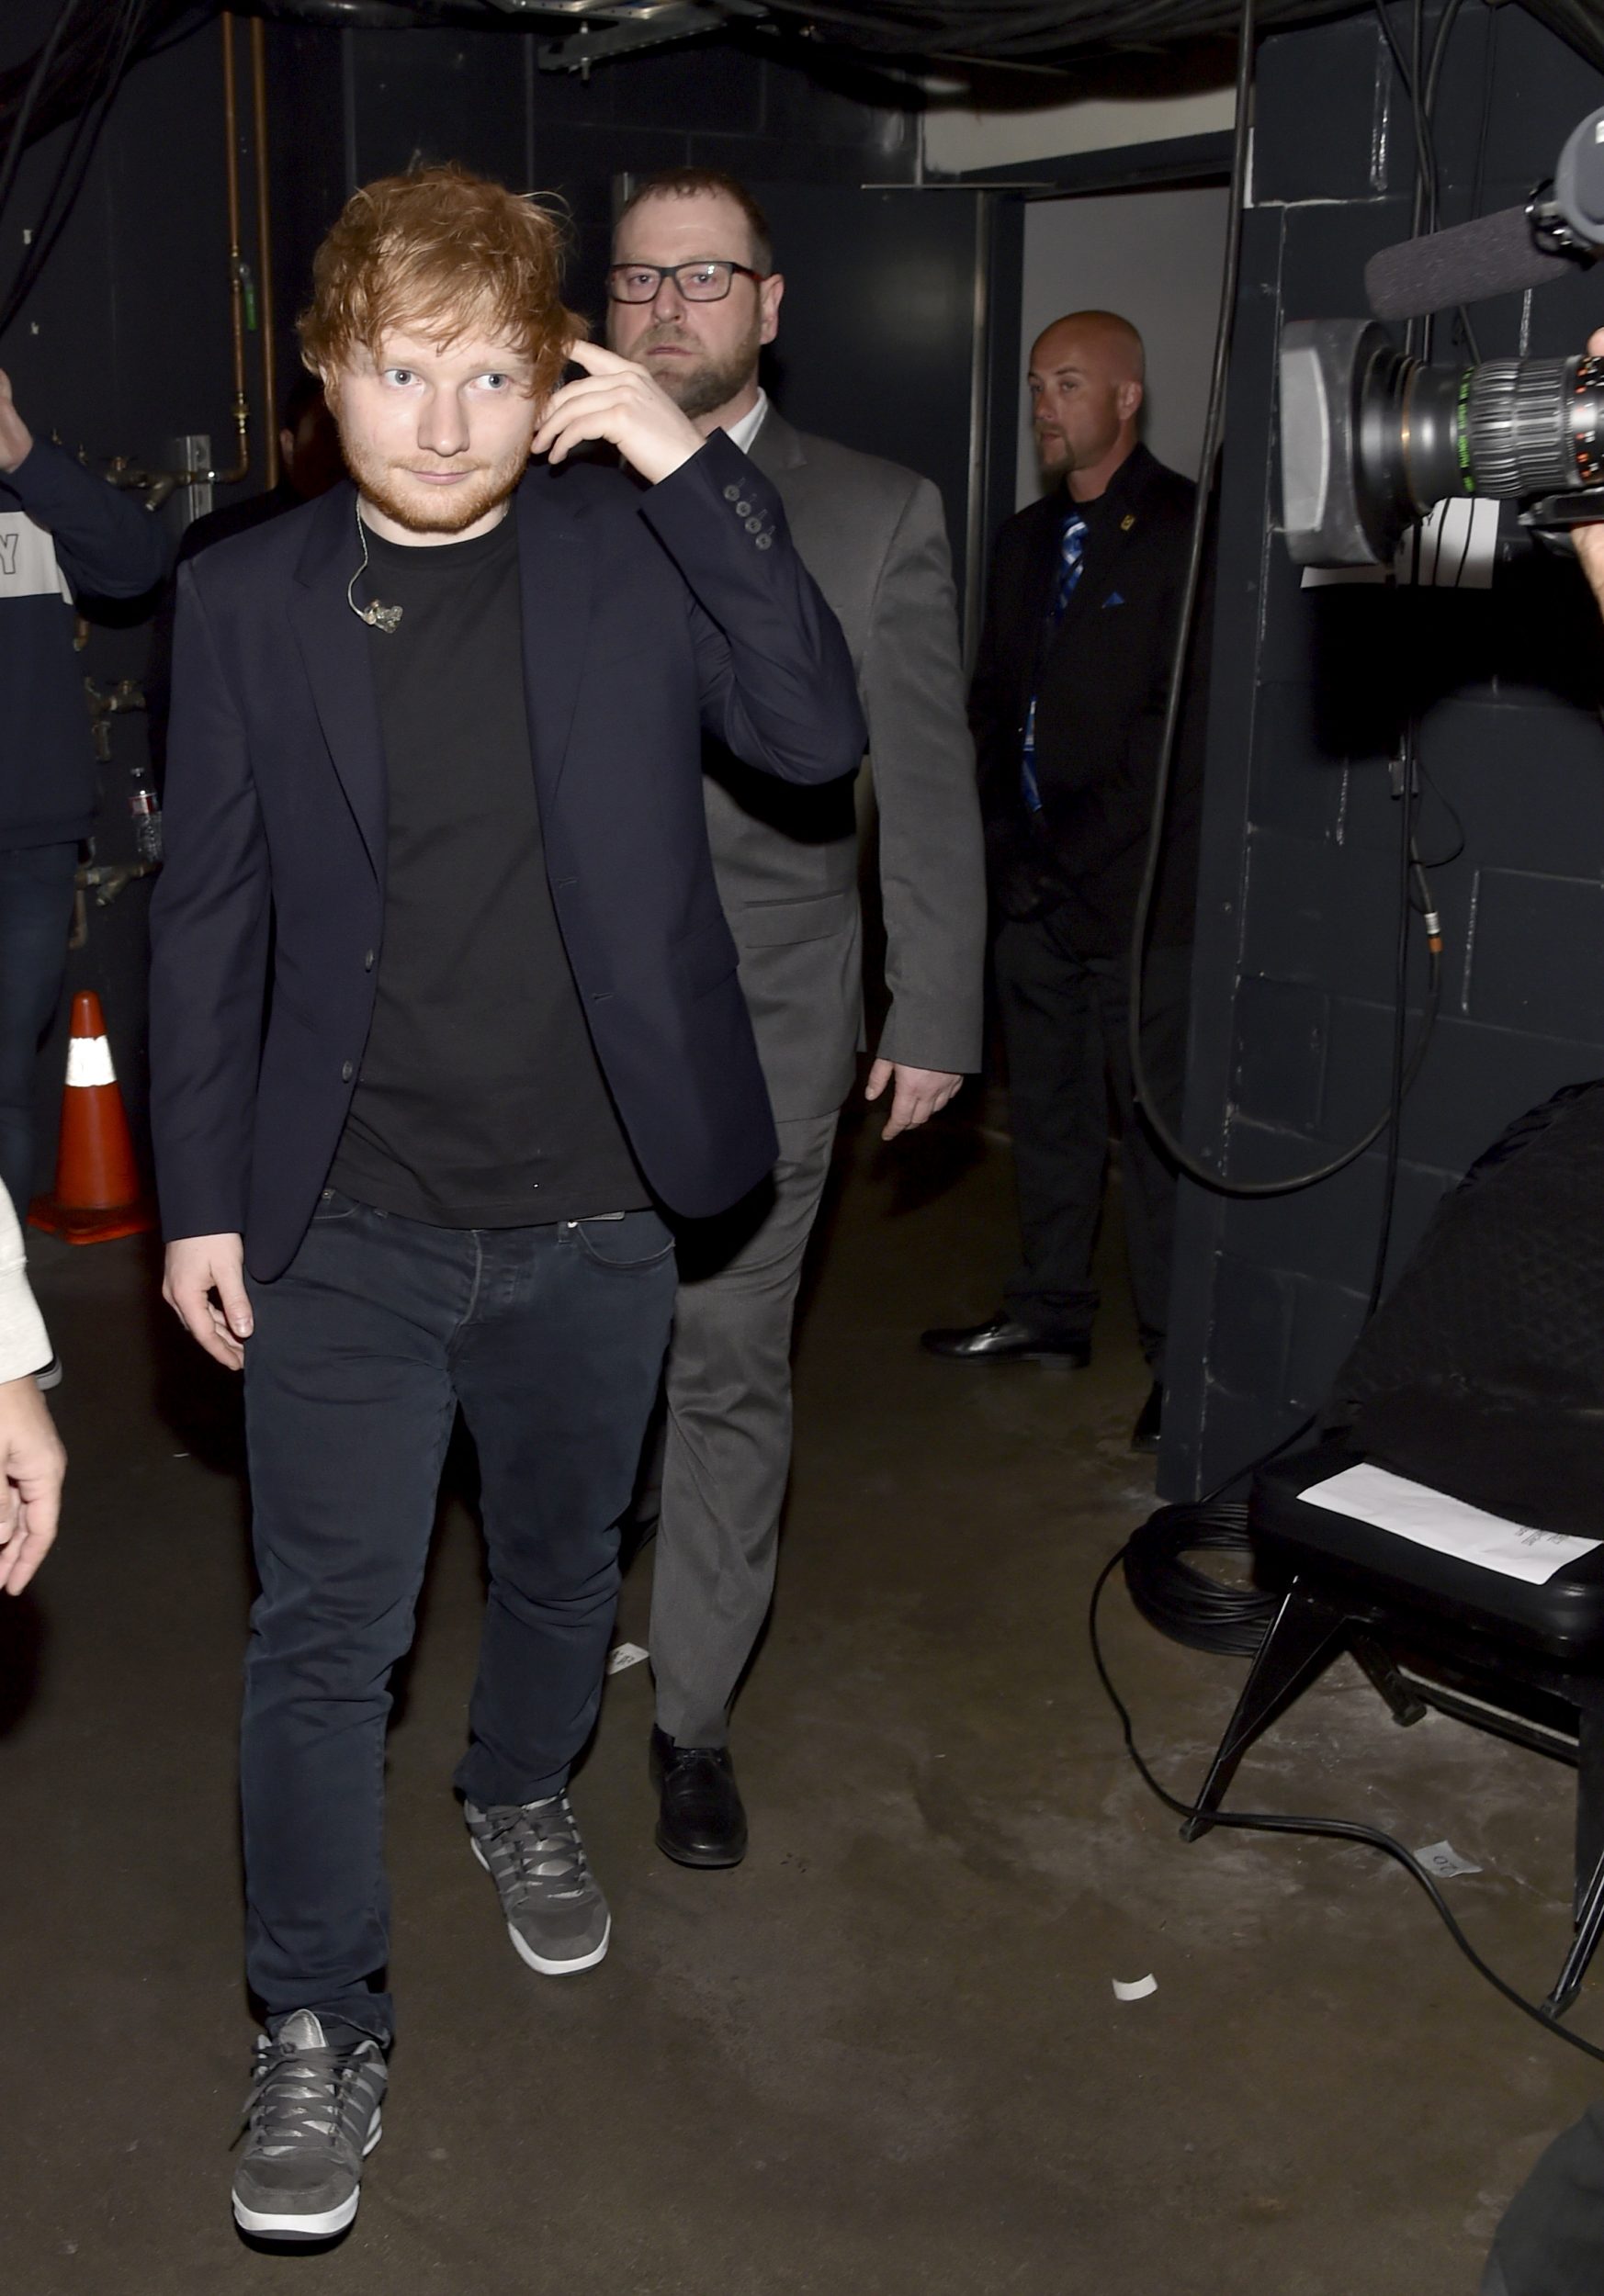 INGLEWOOD, CA - MARCH 05: Singer Ed Sheeran backstage at the 2017 iHeartRadio Music Awards which broadcast live on Turner's TBS, TNT, and truTV at The Forum on March 5, 2017 in Inglewood, California. (Photo by Frazer Harrison/Getty Images for iHeartMedia) *** Local Caption *** Ed Sheeran